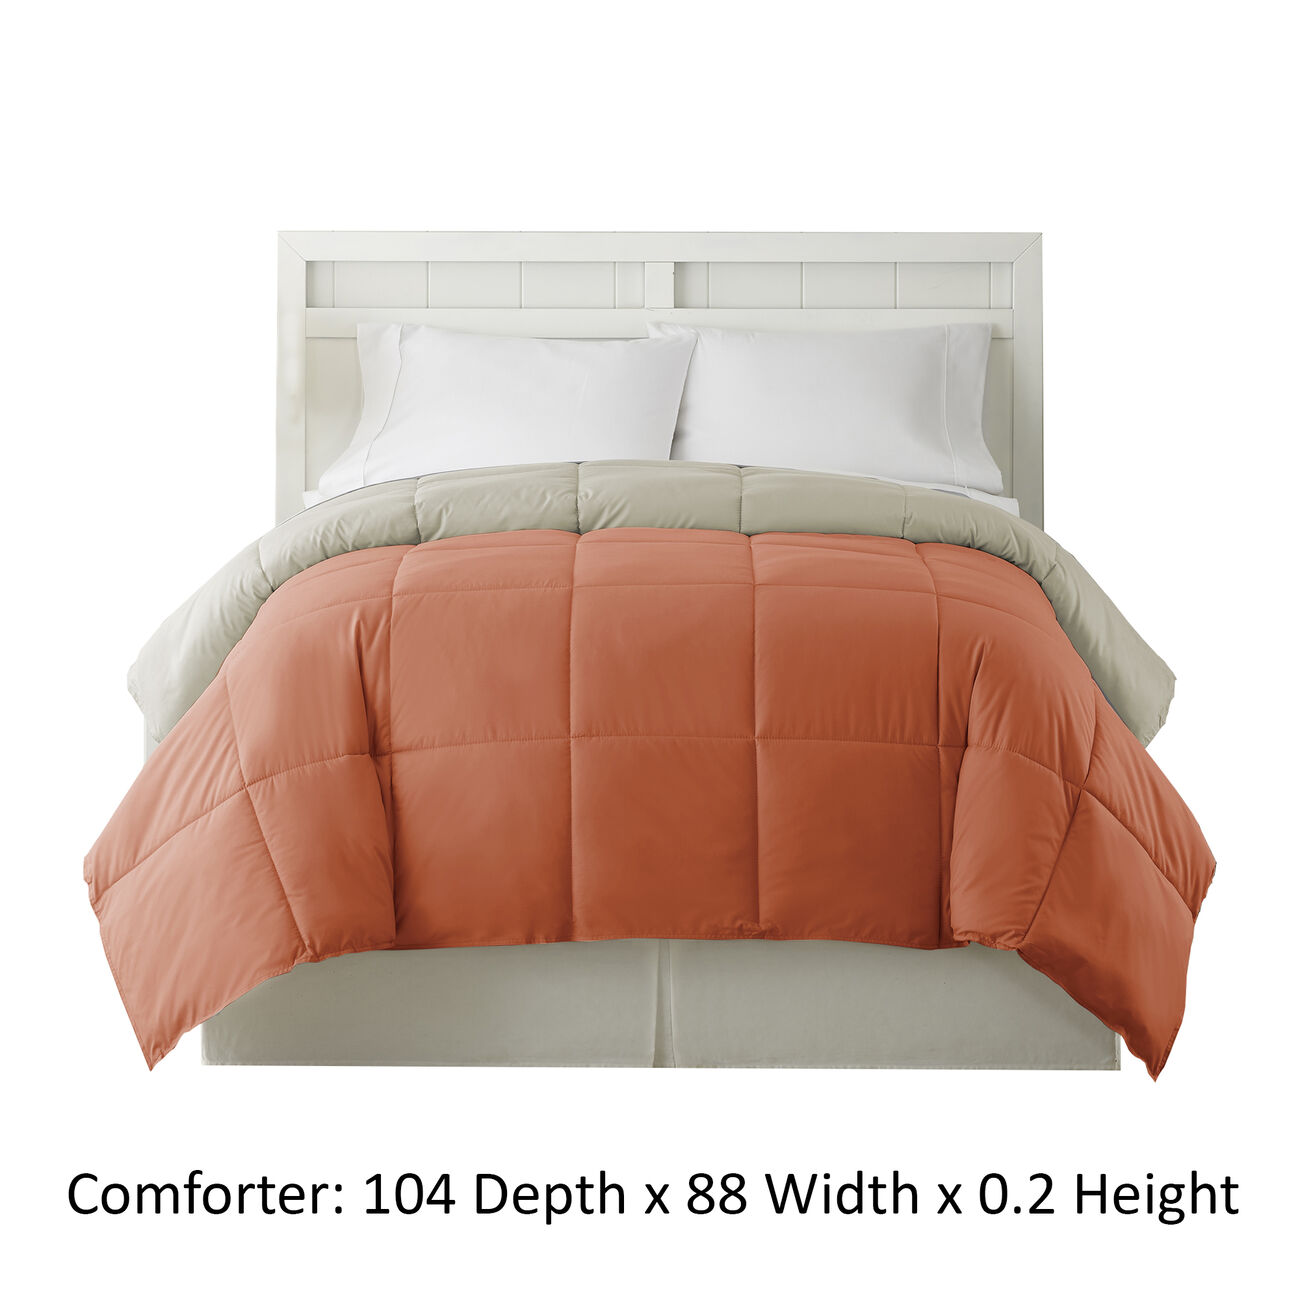 Genoa King Size Box Quilted Reversible Comforter The Urban Port, Orange and Gray